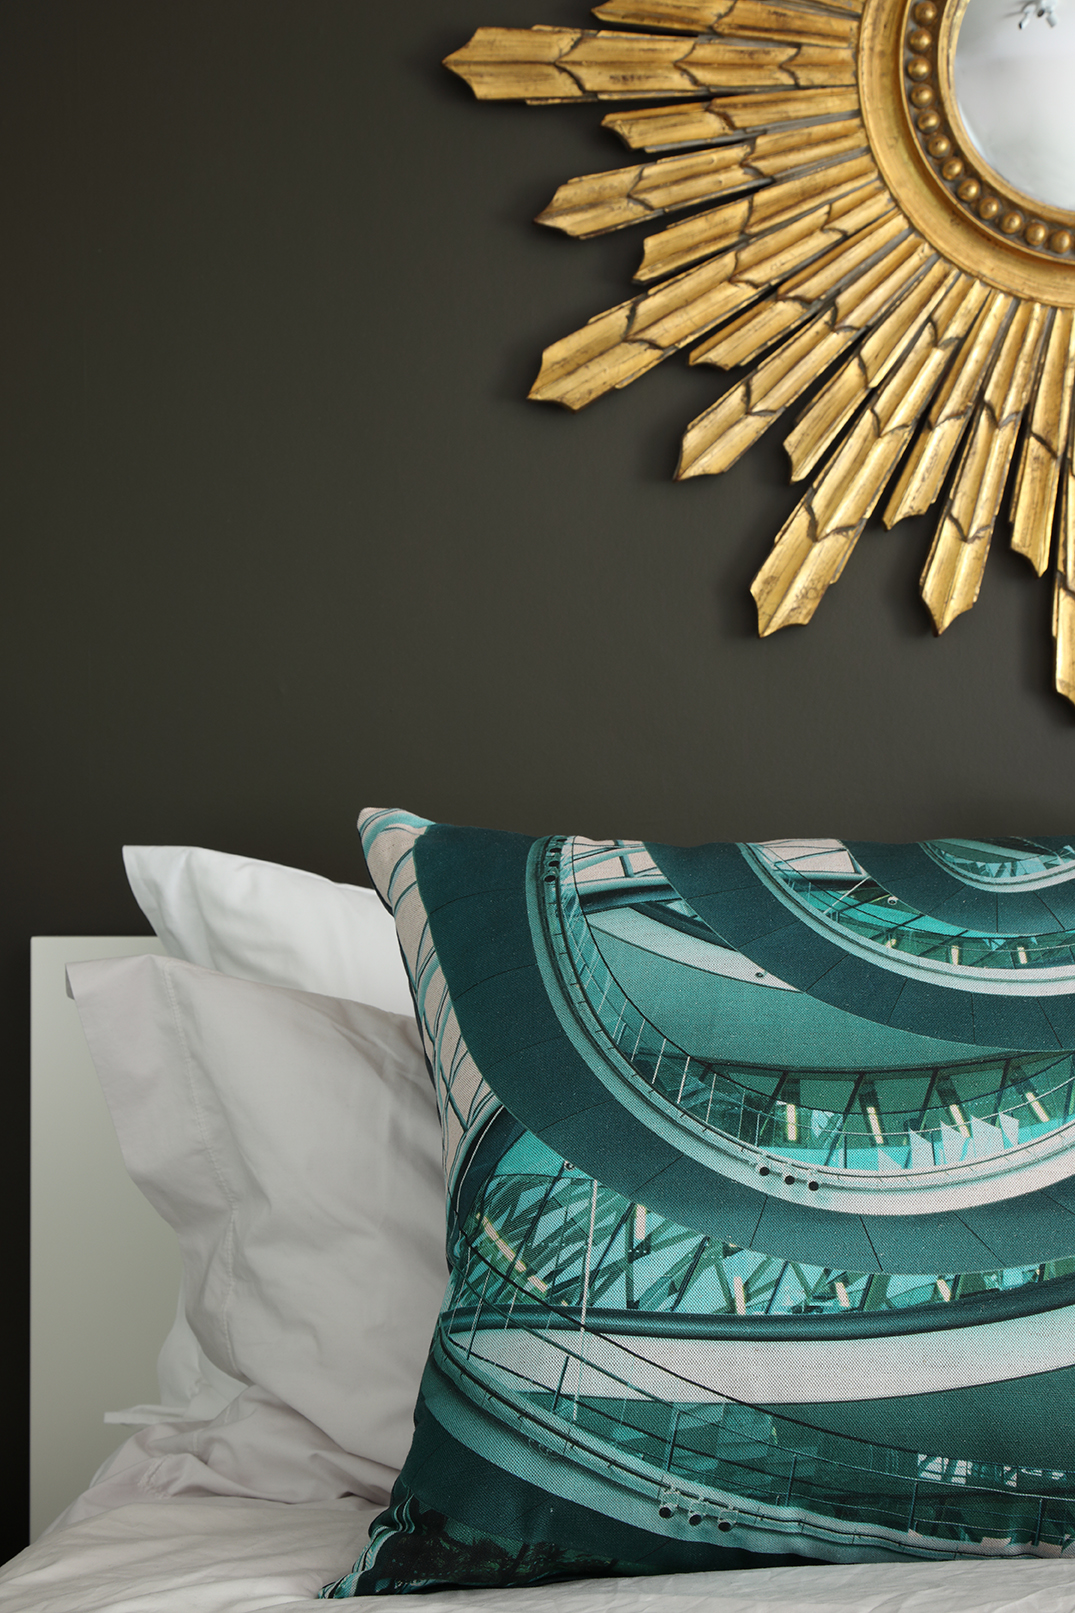 Cushion in shades of teal and turquoise printed with image of the spiral walkway at London's former City Hall